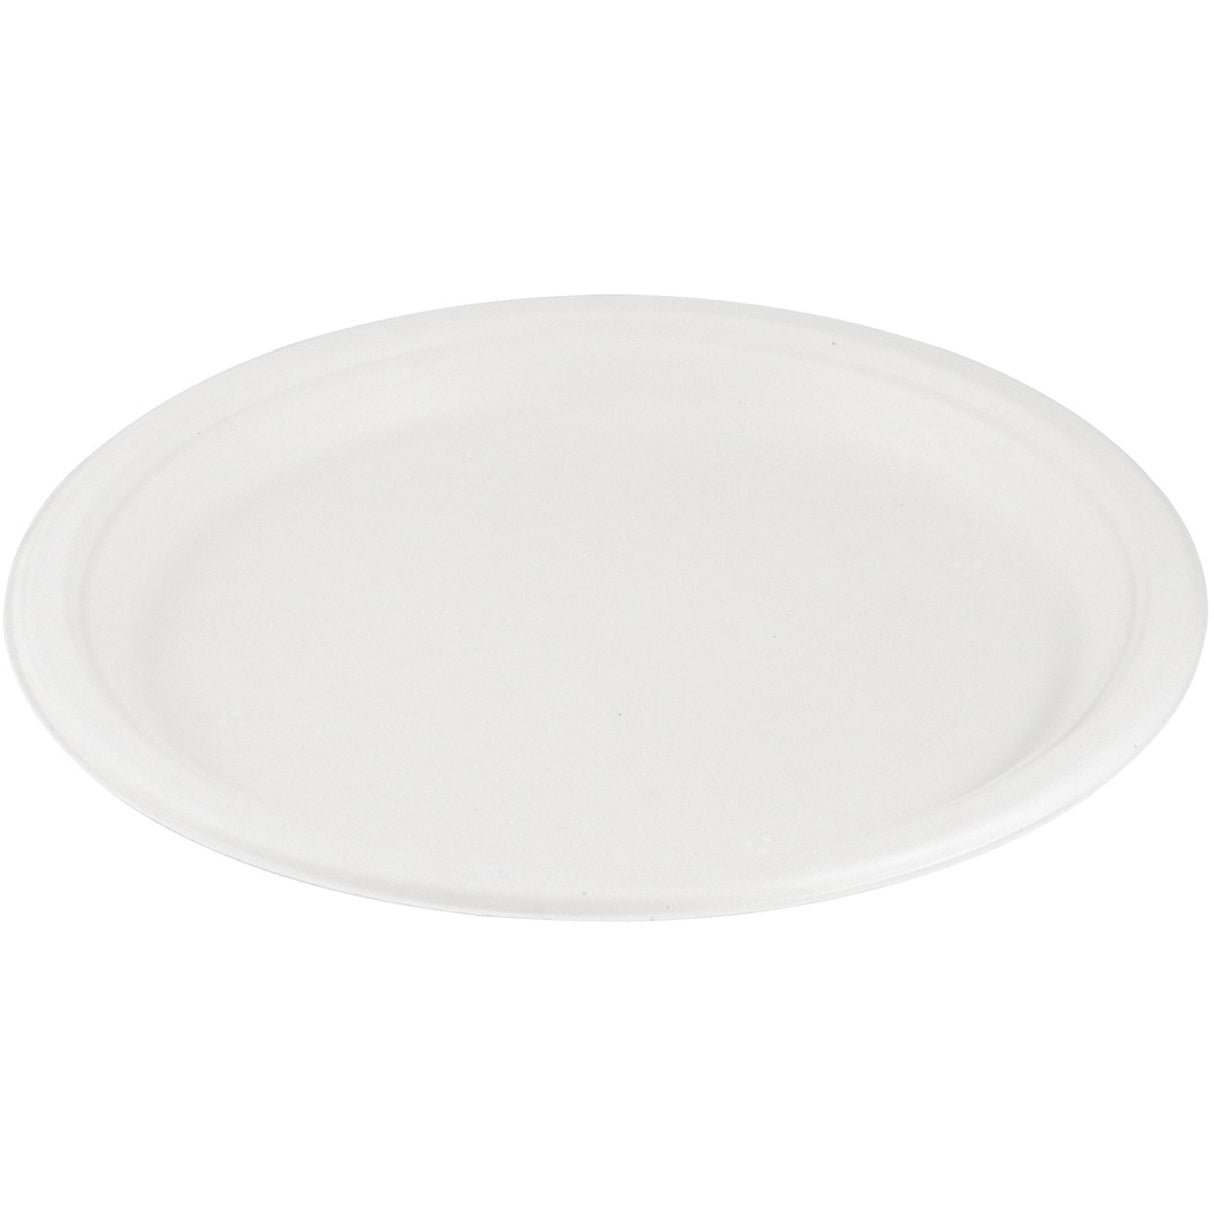 Eco Guardian 9" Round Compostable Plates